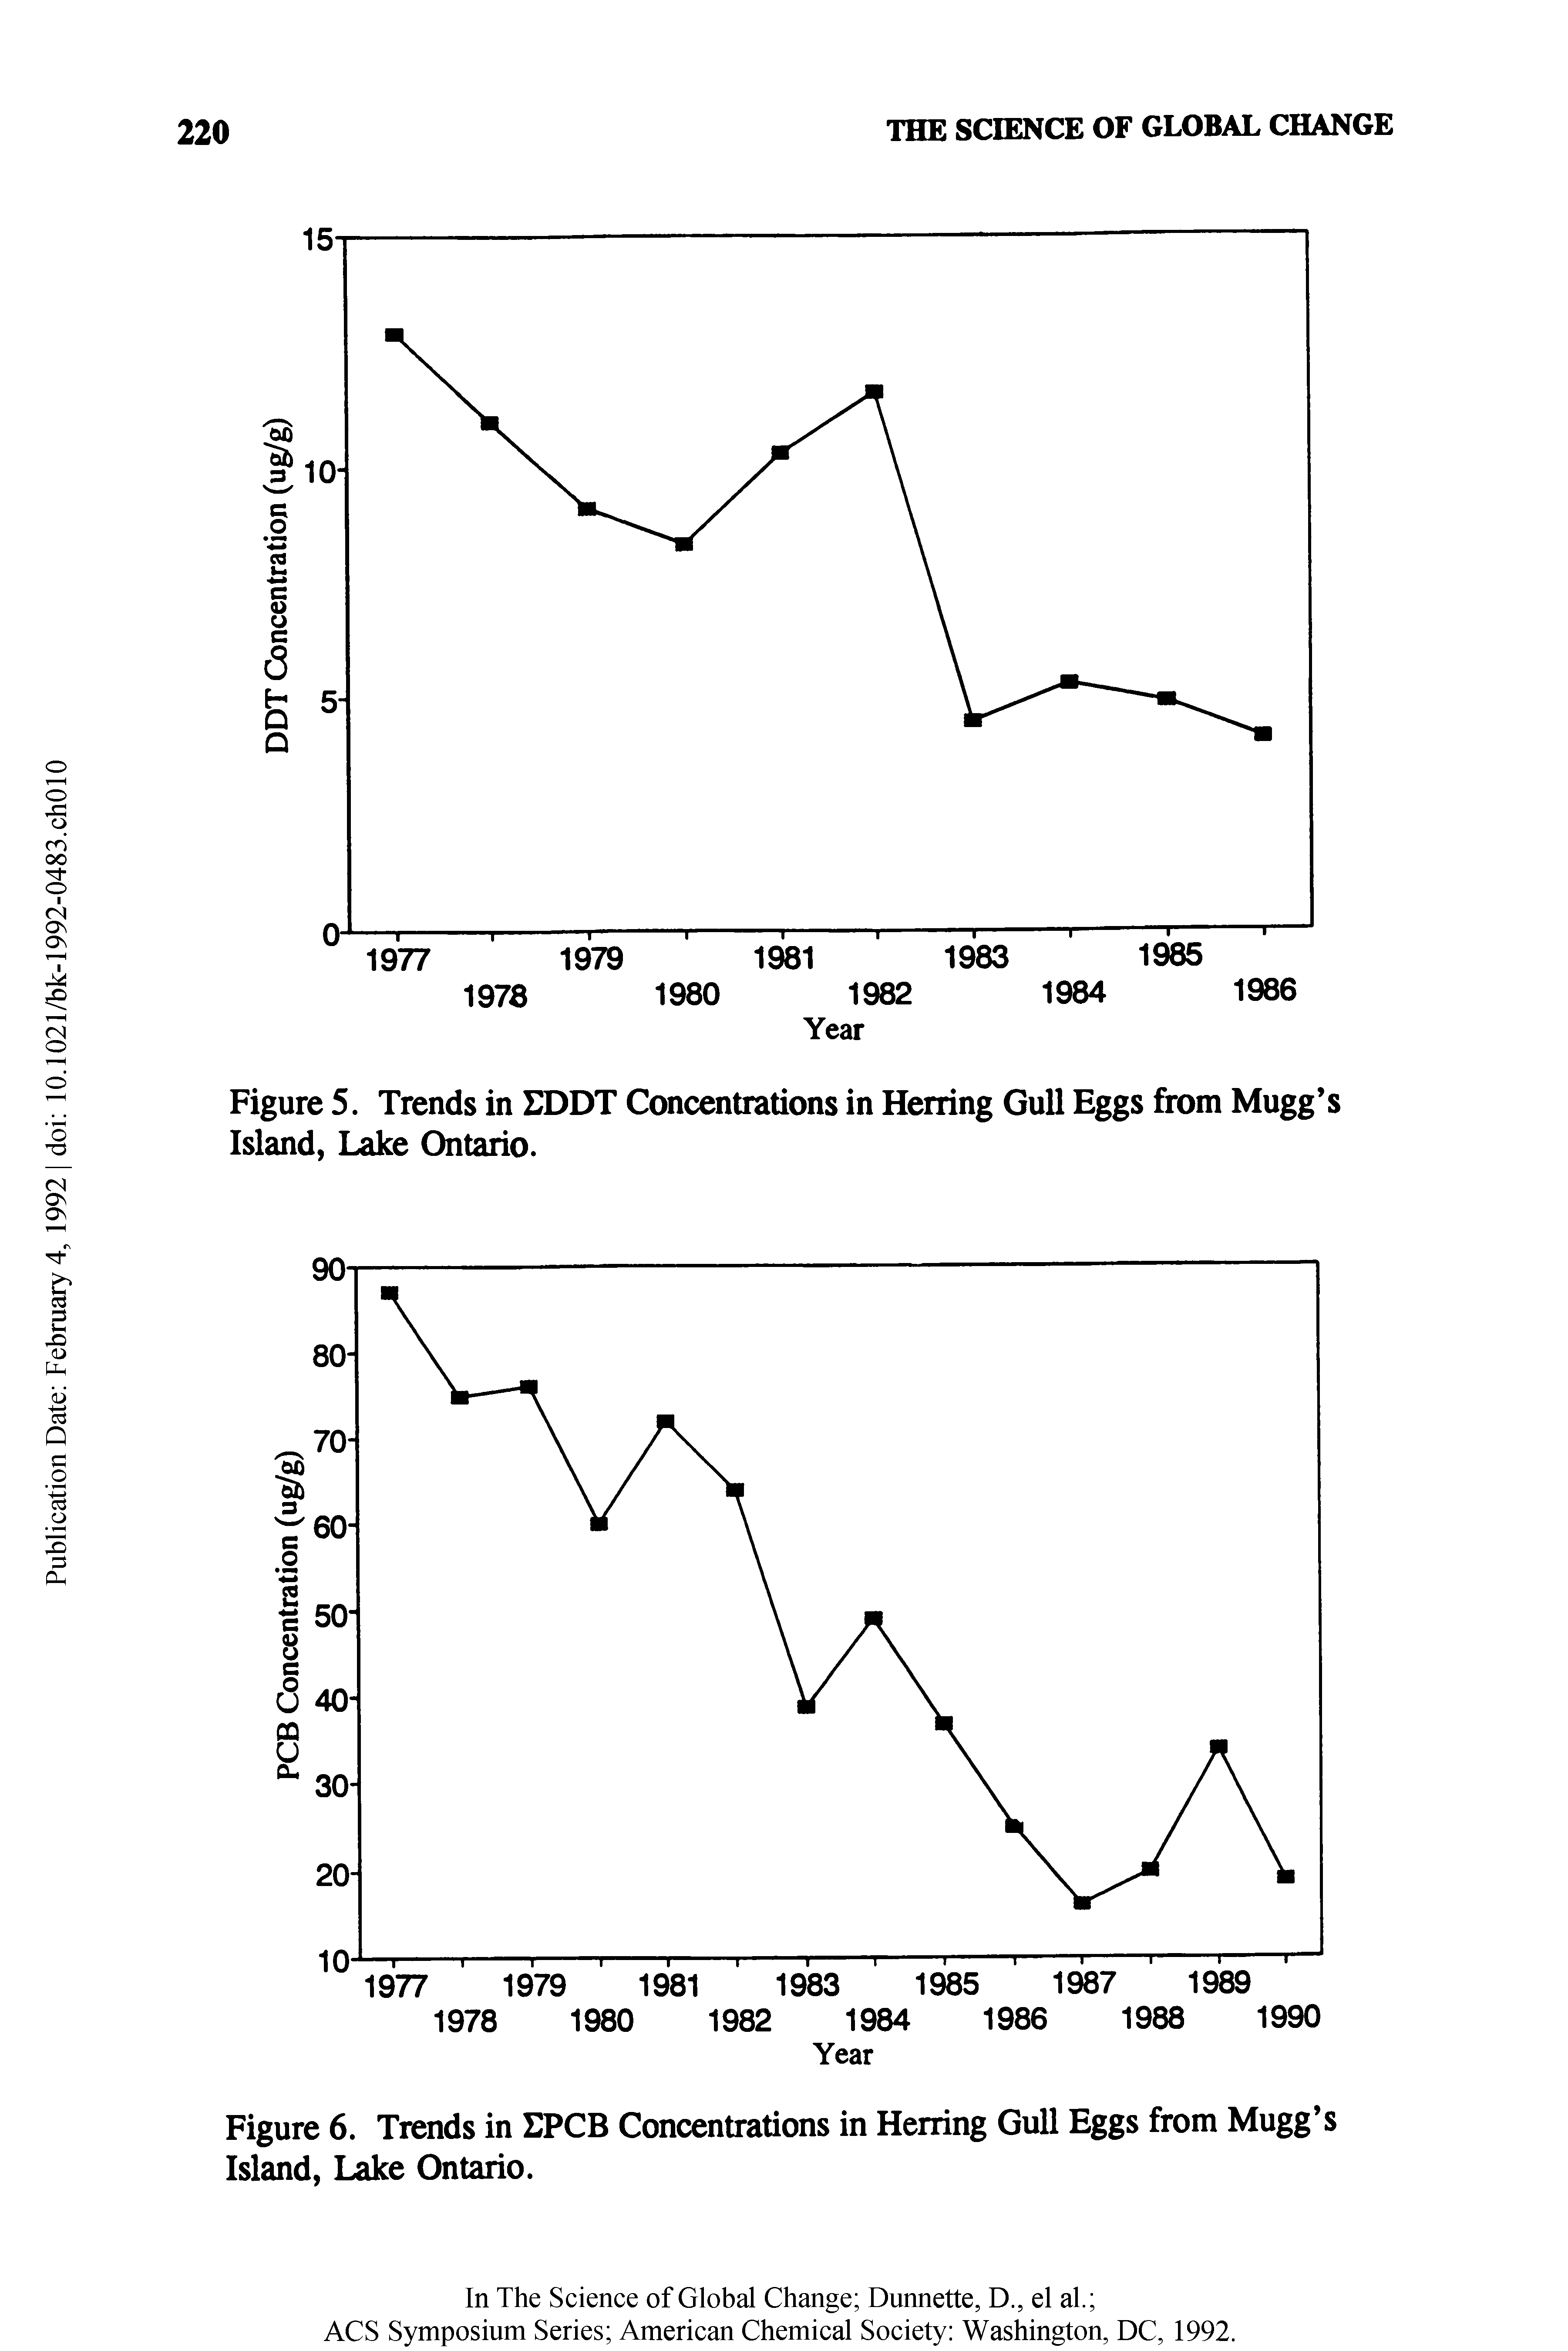 Figure 5. Trends in EDDT Concentrations in Herring Gull Eggs from Mugg s Island, Lake Ontario.